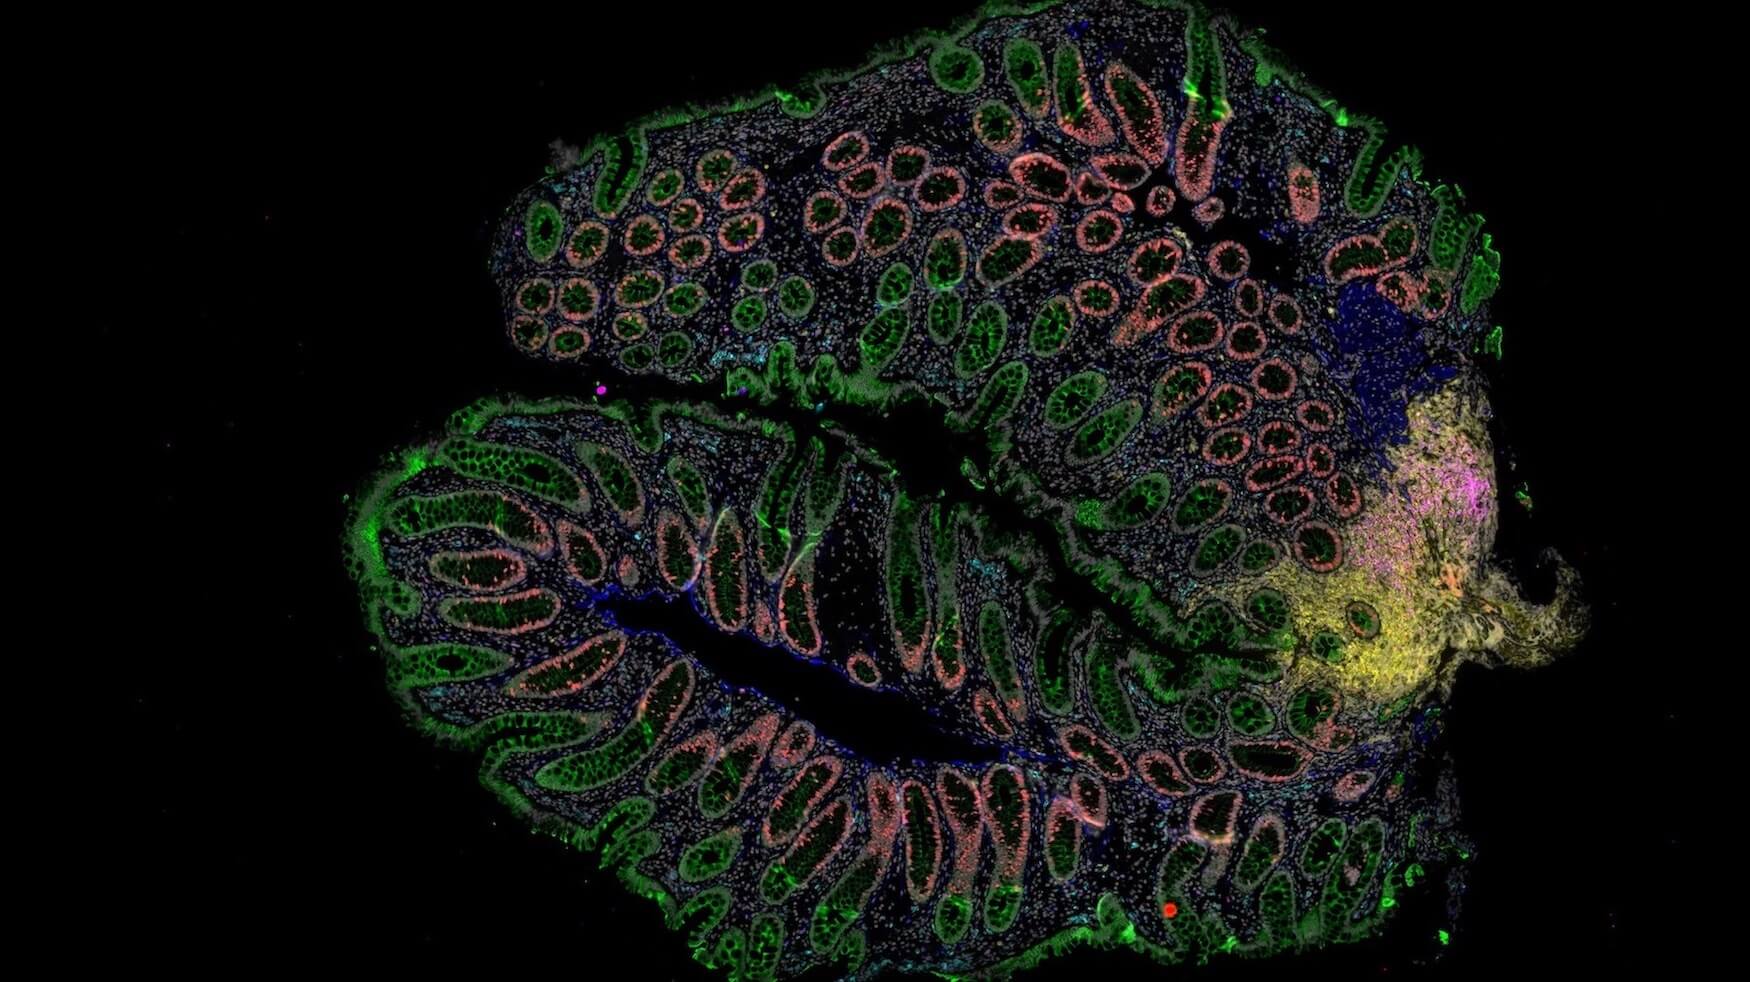 This piece of large intestine, biopsied from a pediatric IBD patient, has been processed to reveal cellular and molecular features we can use to understand disease activity. These include epithelial cells (green), muscle (dark blue), T cells (lavender and purple), B cells (yellow), monocytes and macrophages (cyan), and cells that are actively dividing (red).